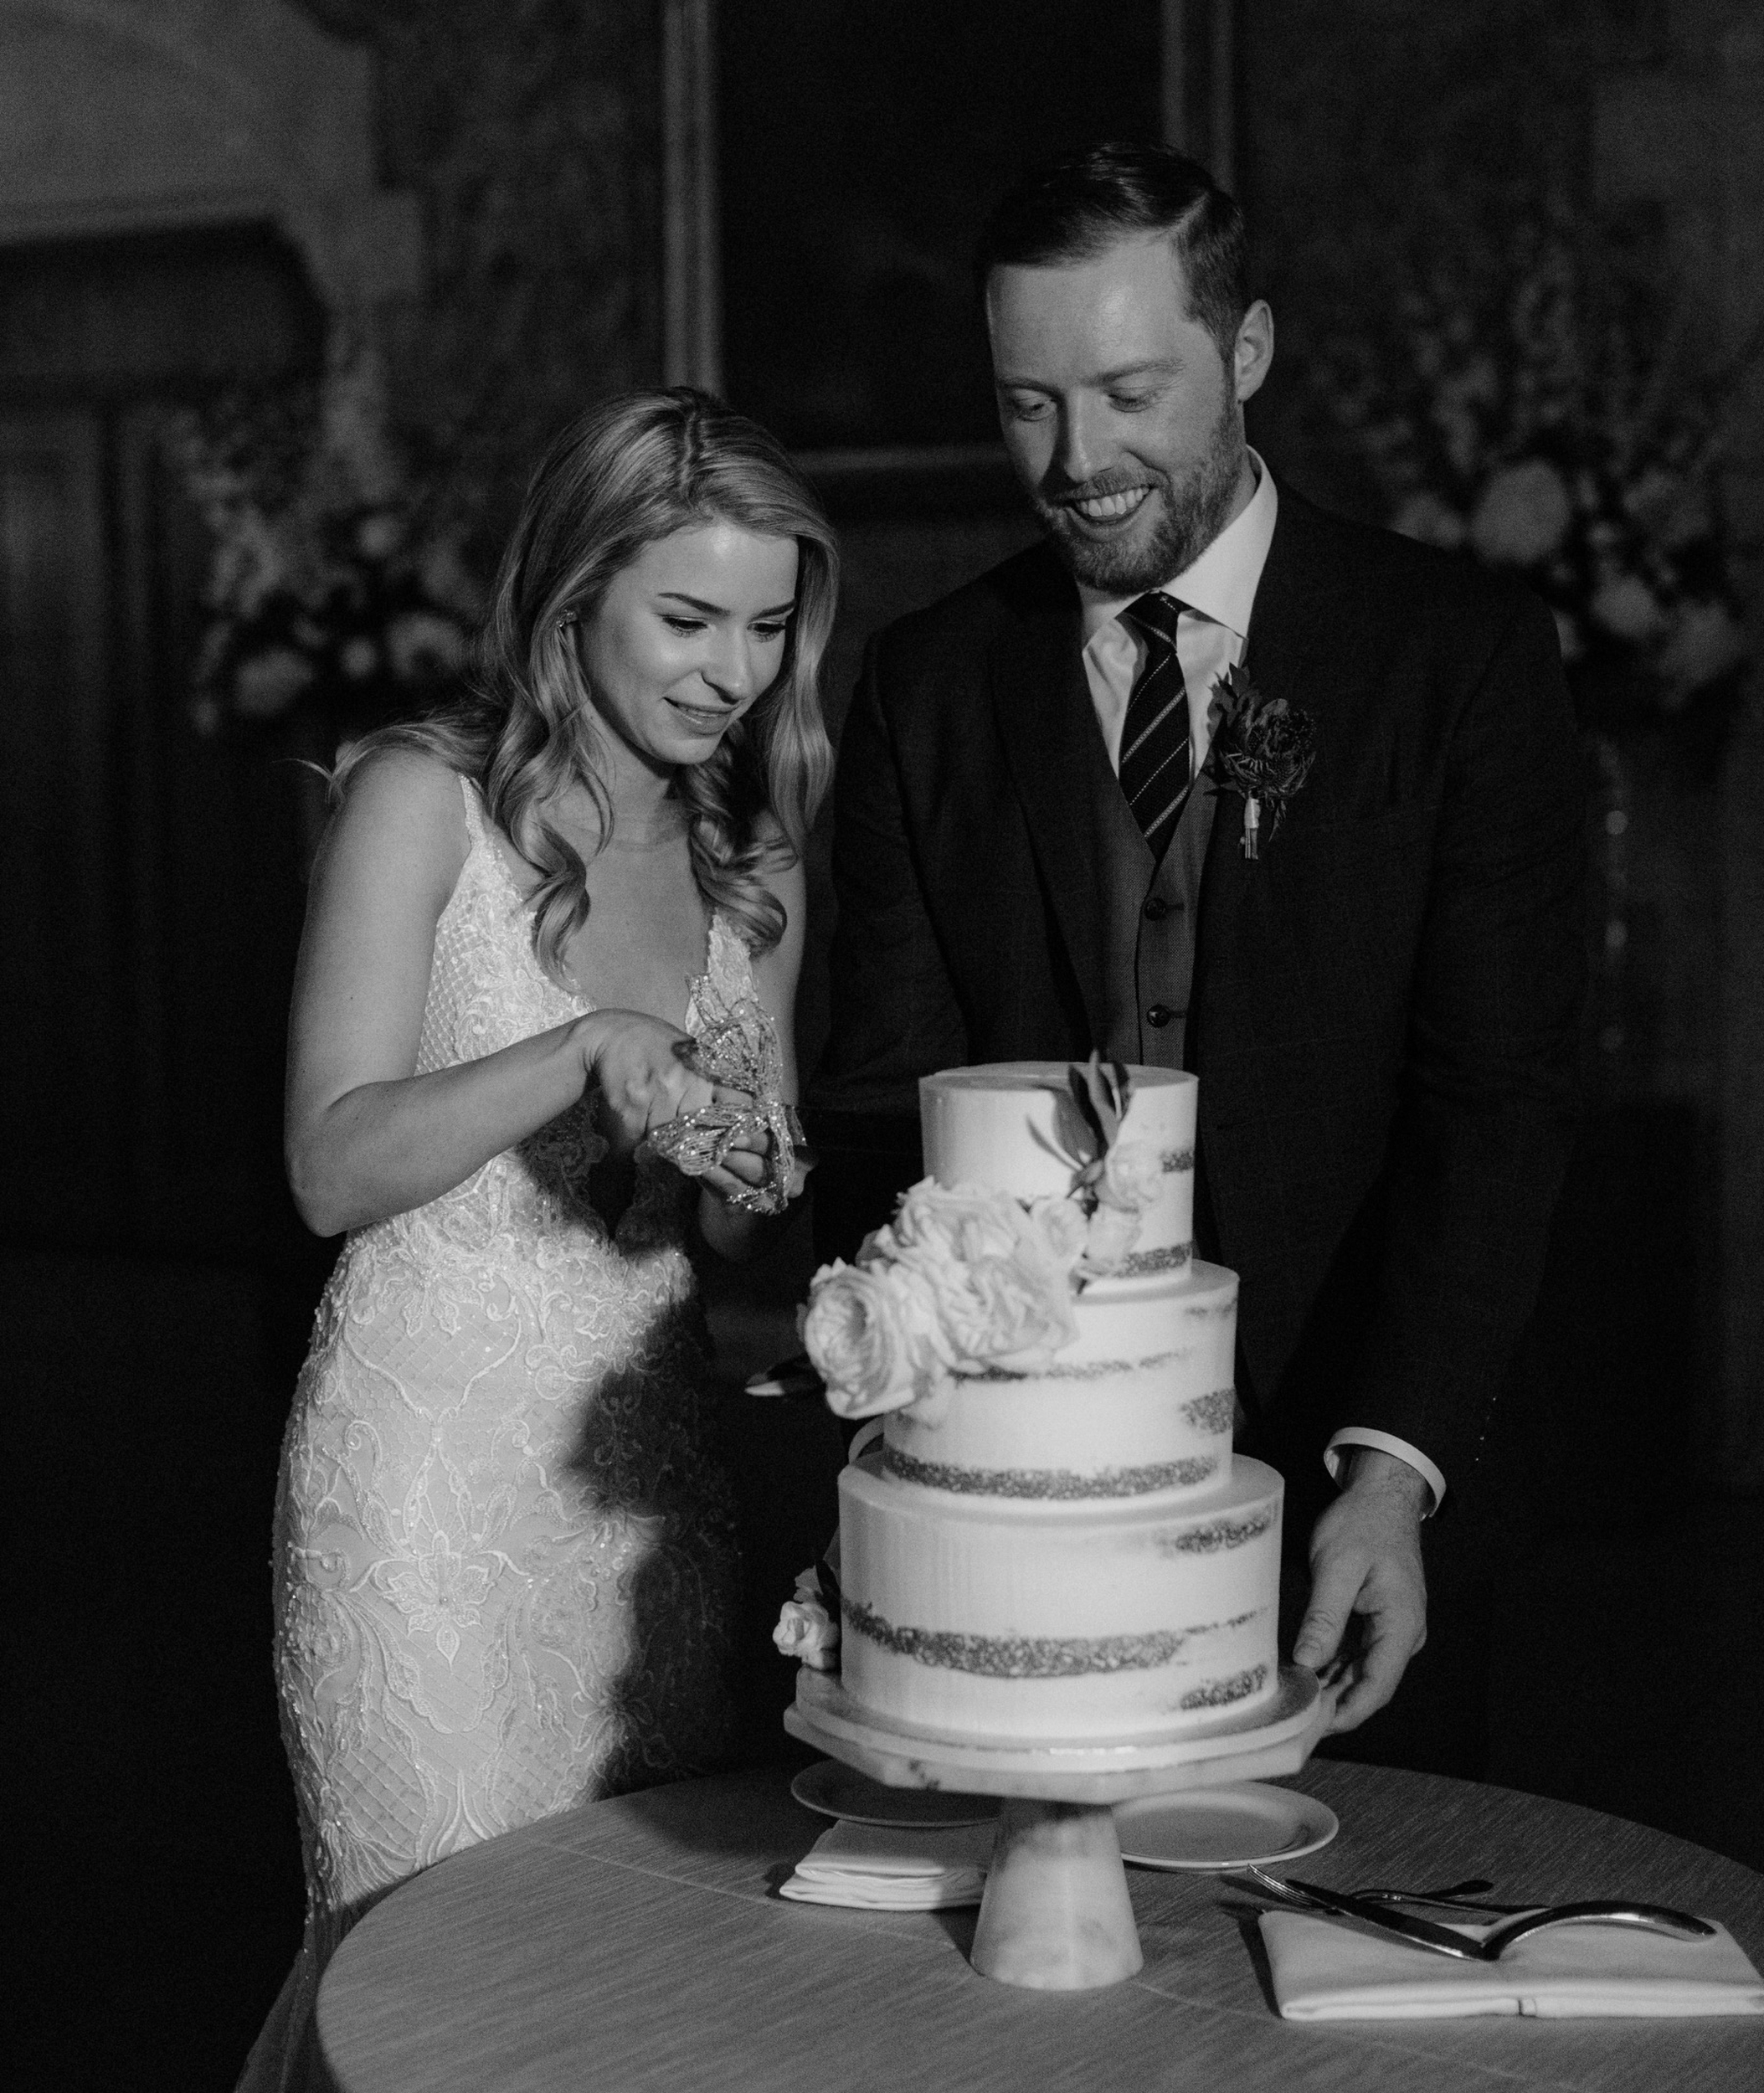 Couple cutting their cake from Kake by Darci at the Banff Springs in black and white